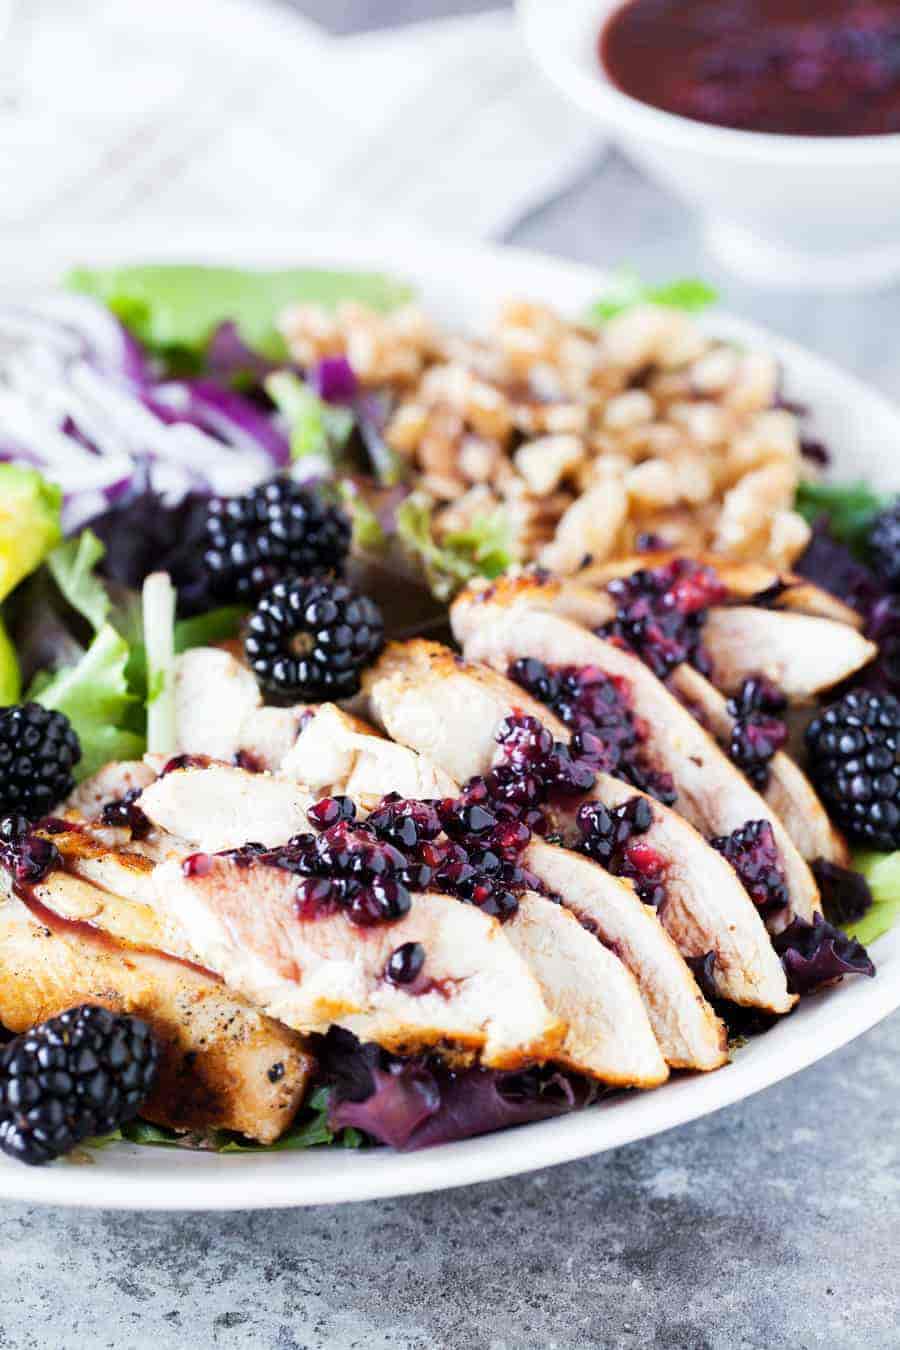 Incredibly delicious and healthy chicken salad with blackberries, avocado and walnuts